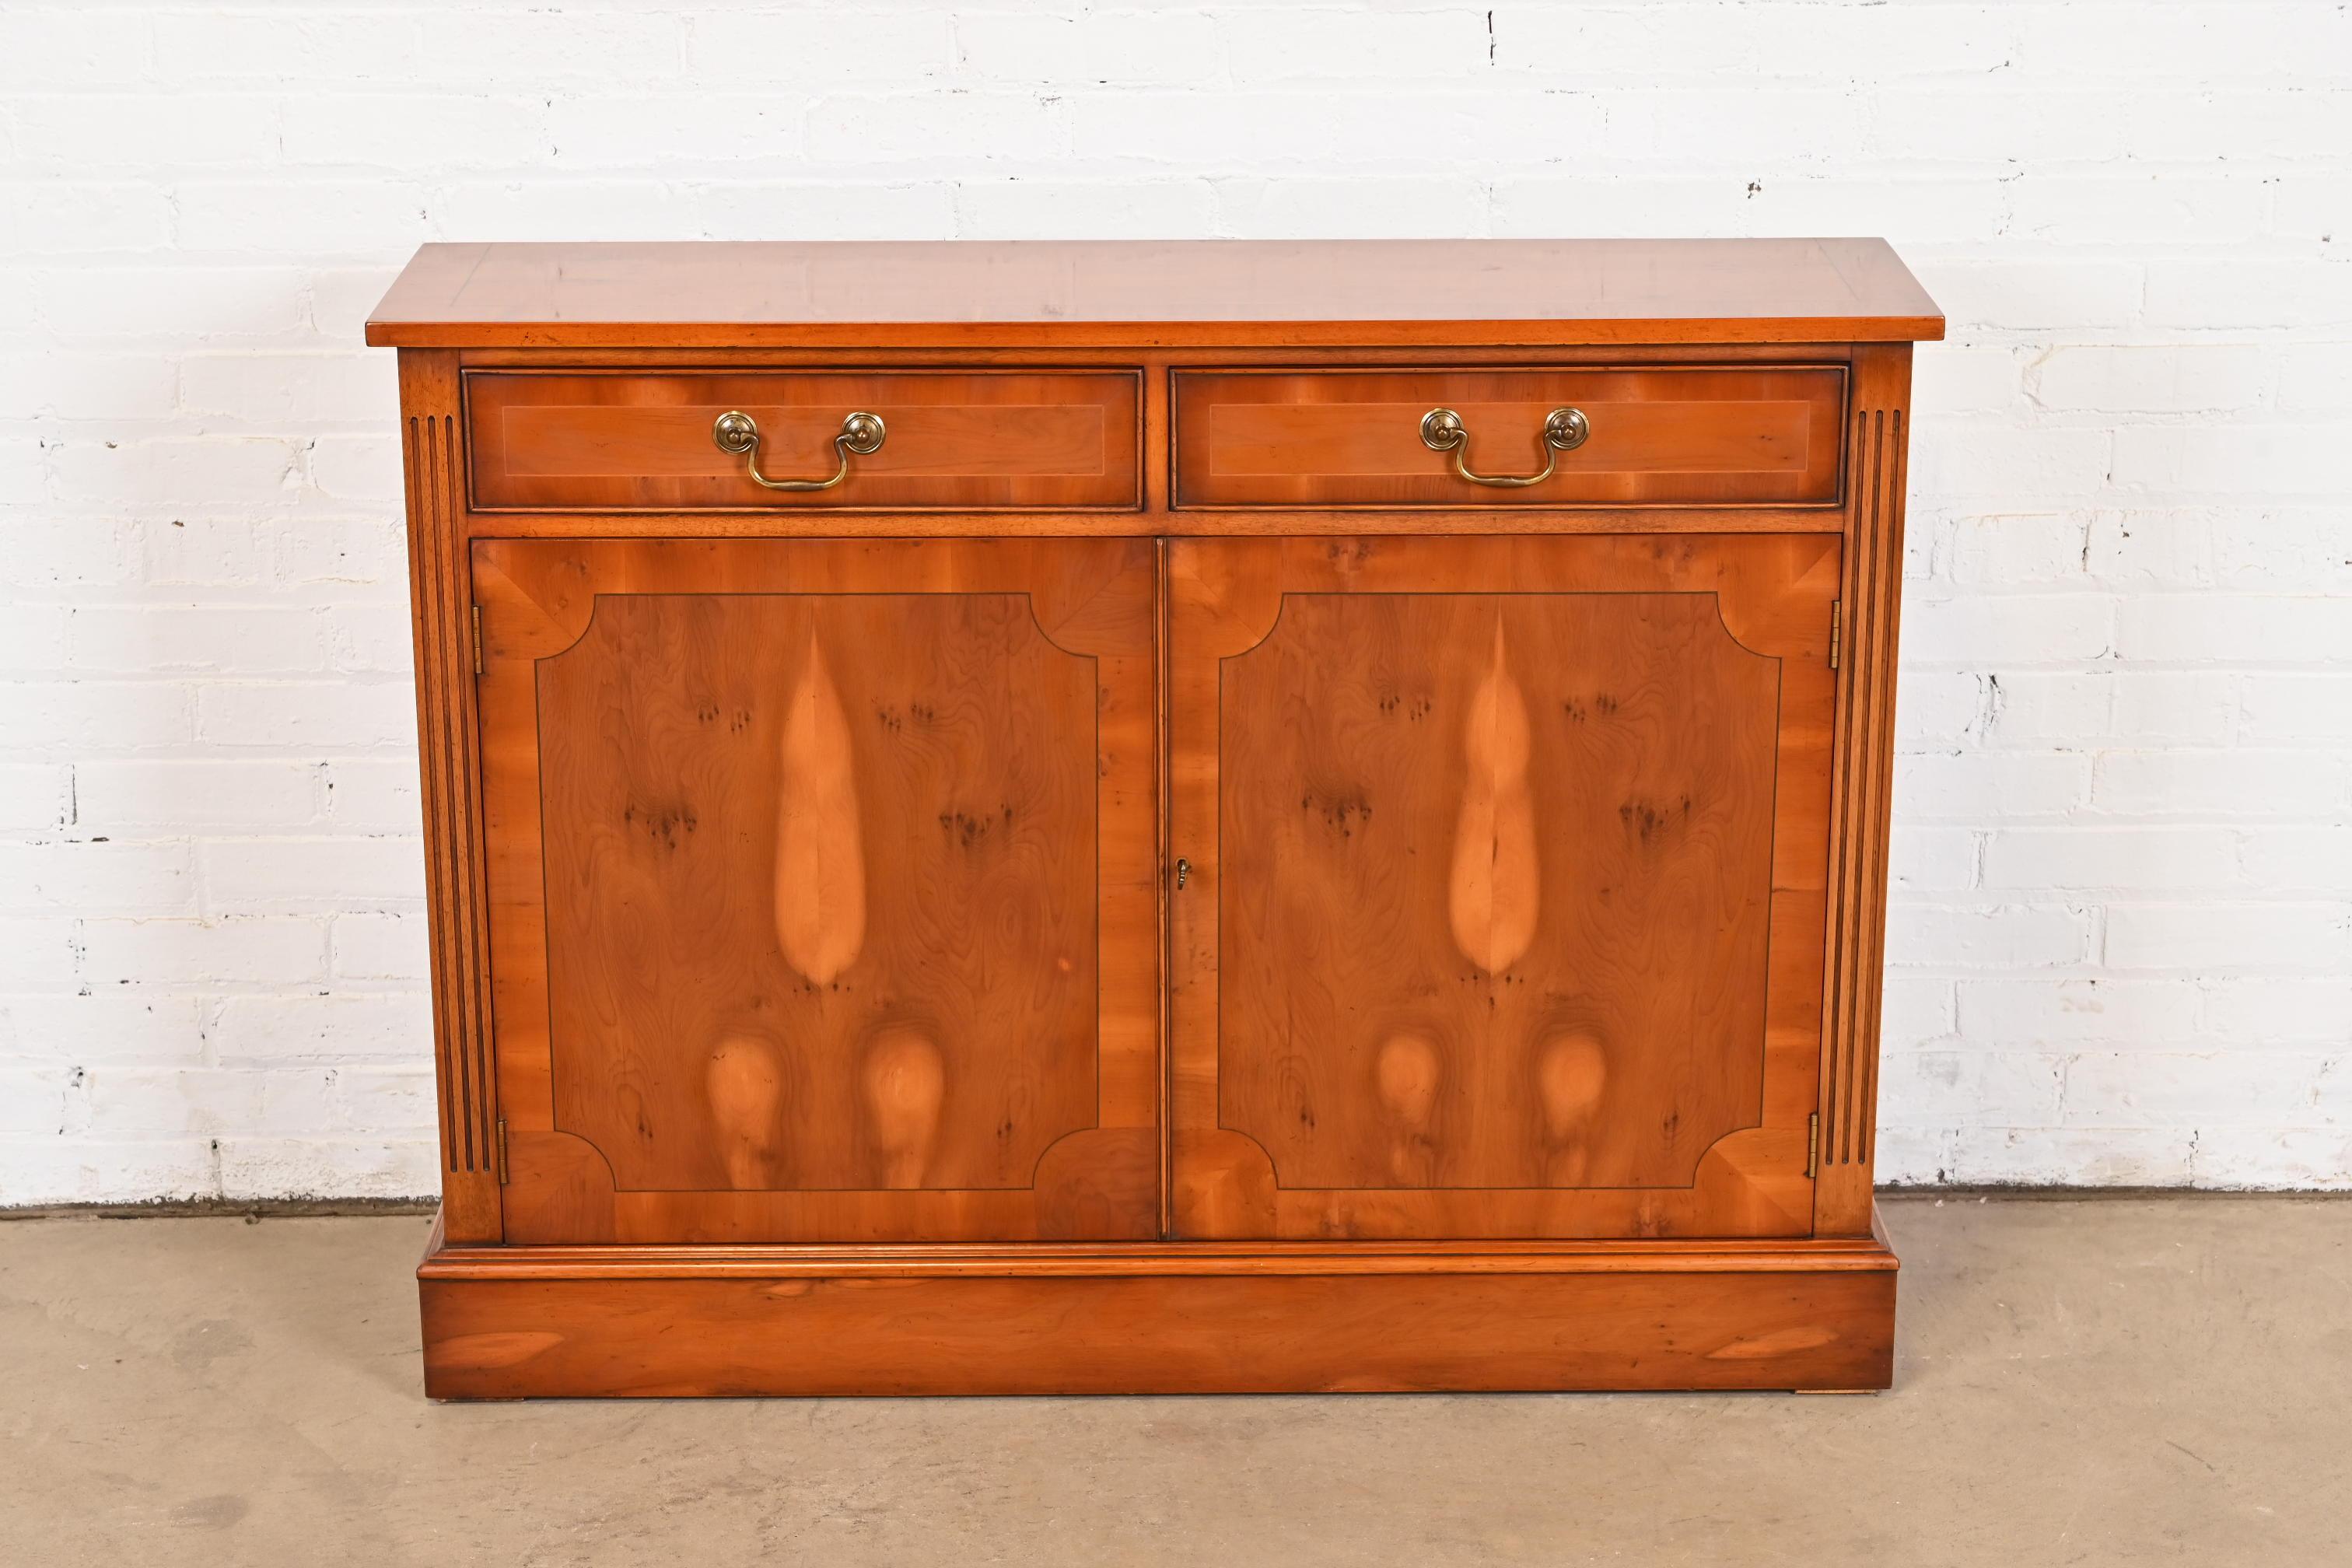 A gorgeous English Georgian style console, buffet server, or bar cabinet

In the manner of Baker Furniture

USA, Circa 1980s

Banded book-matched yew wood, with original brass hardware. Cabinet locks, and key is included.

Measures: 45